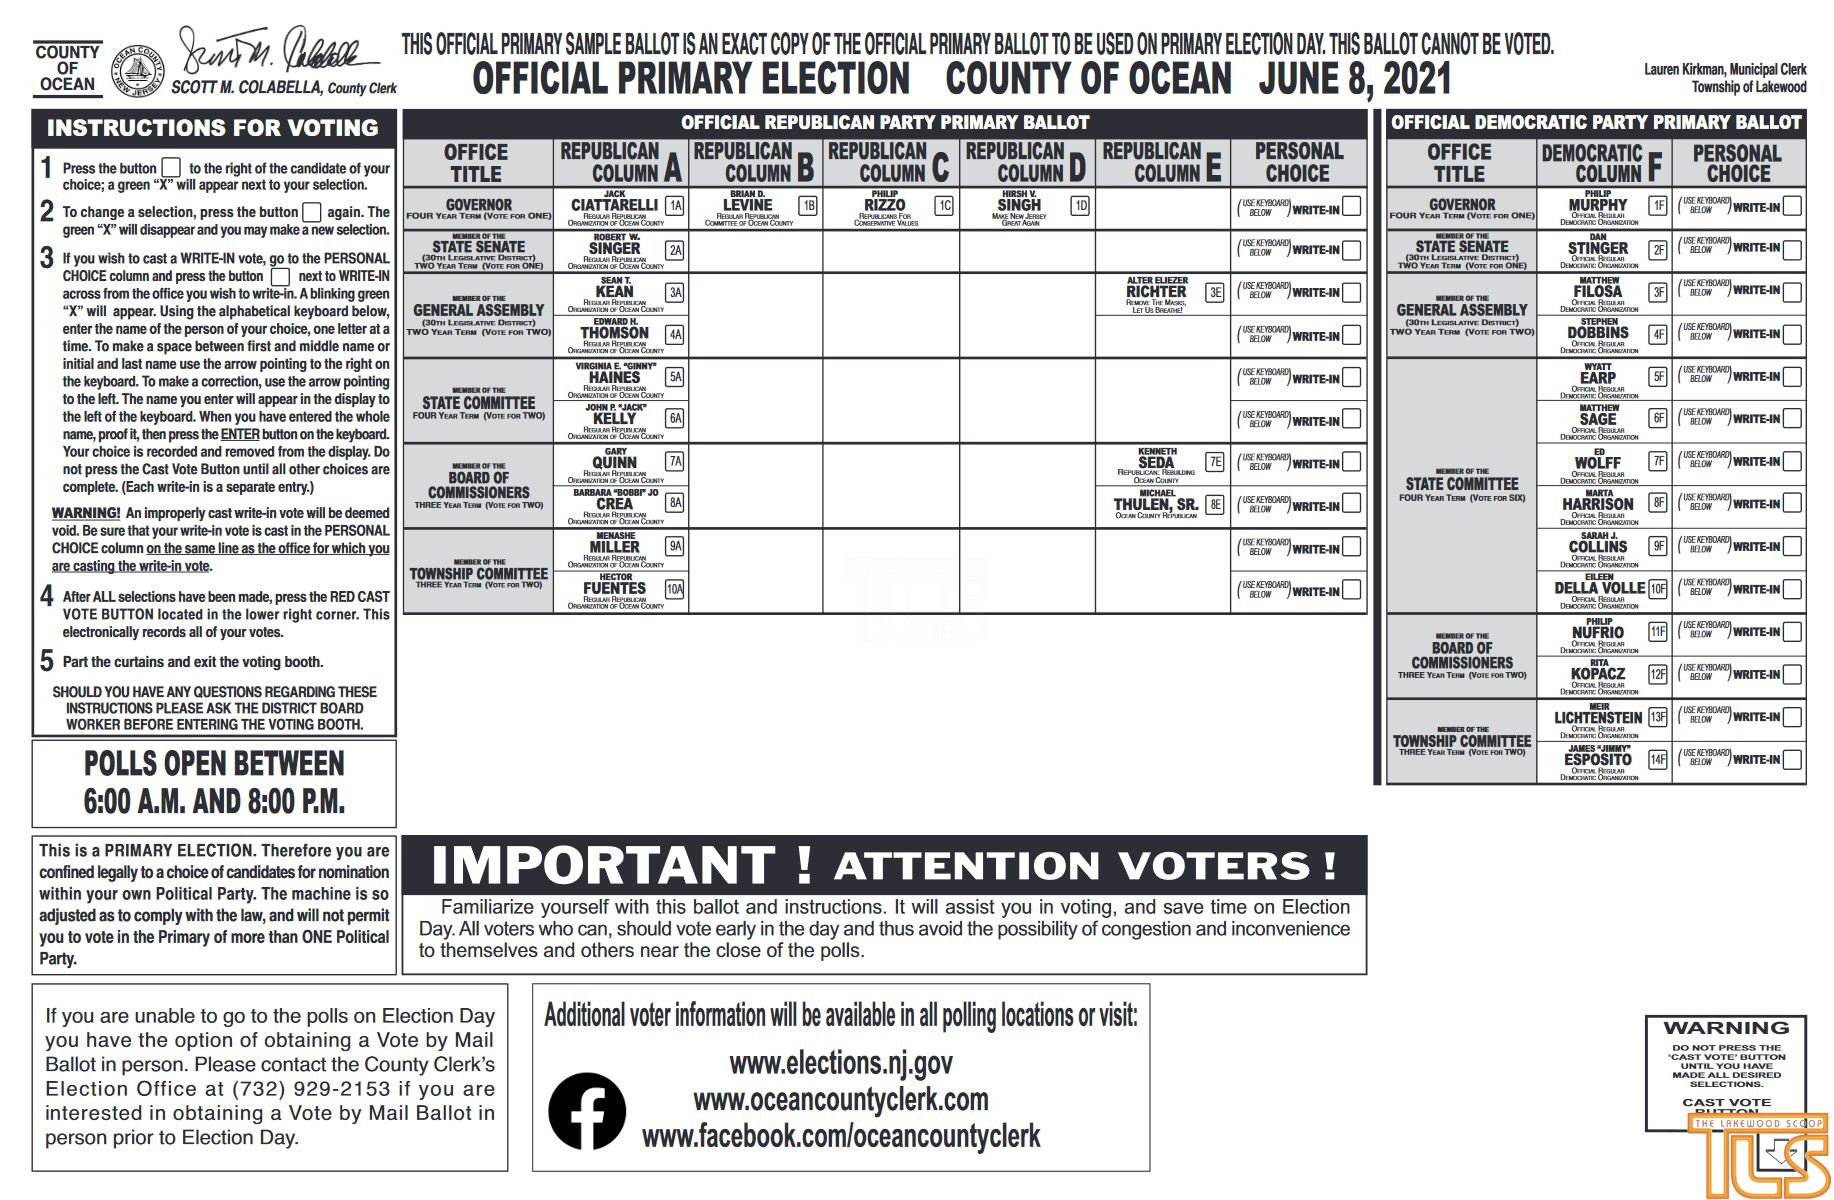 Primary Election Sample Ballots Arrive in Mail The Lakewood Scoop